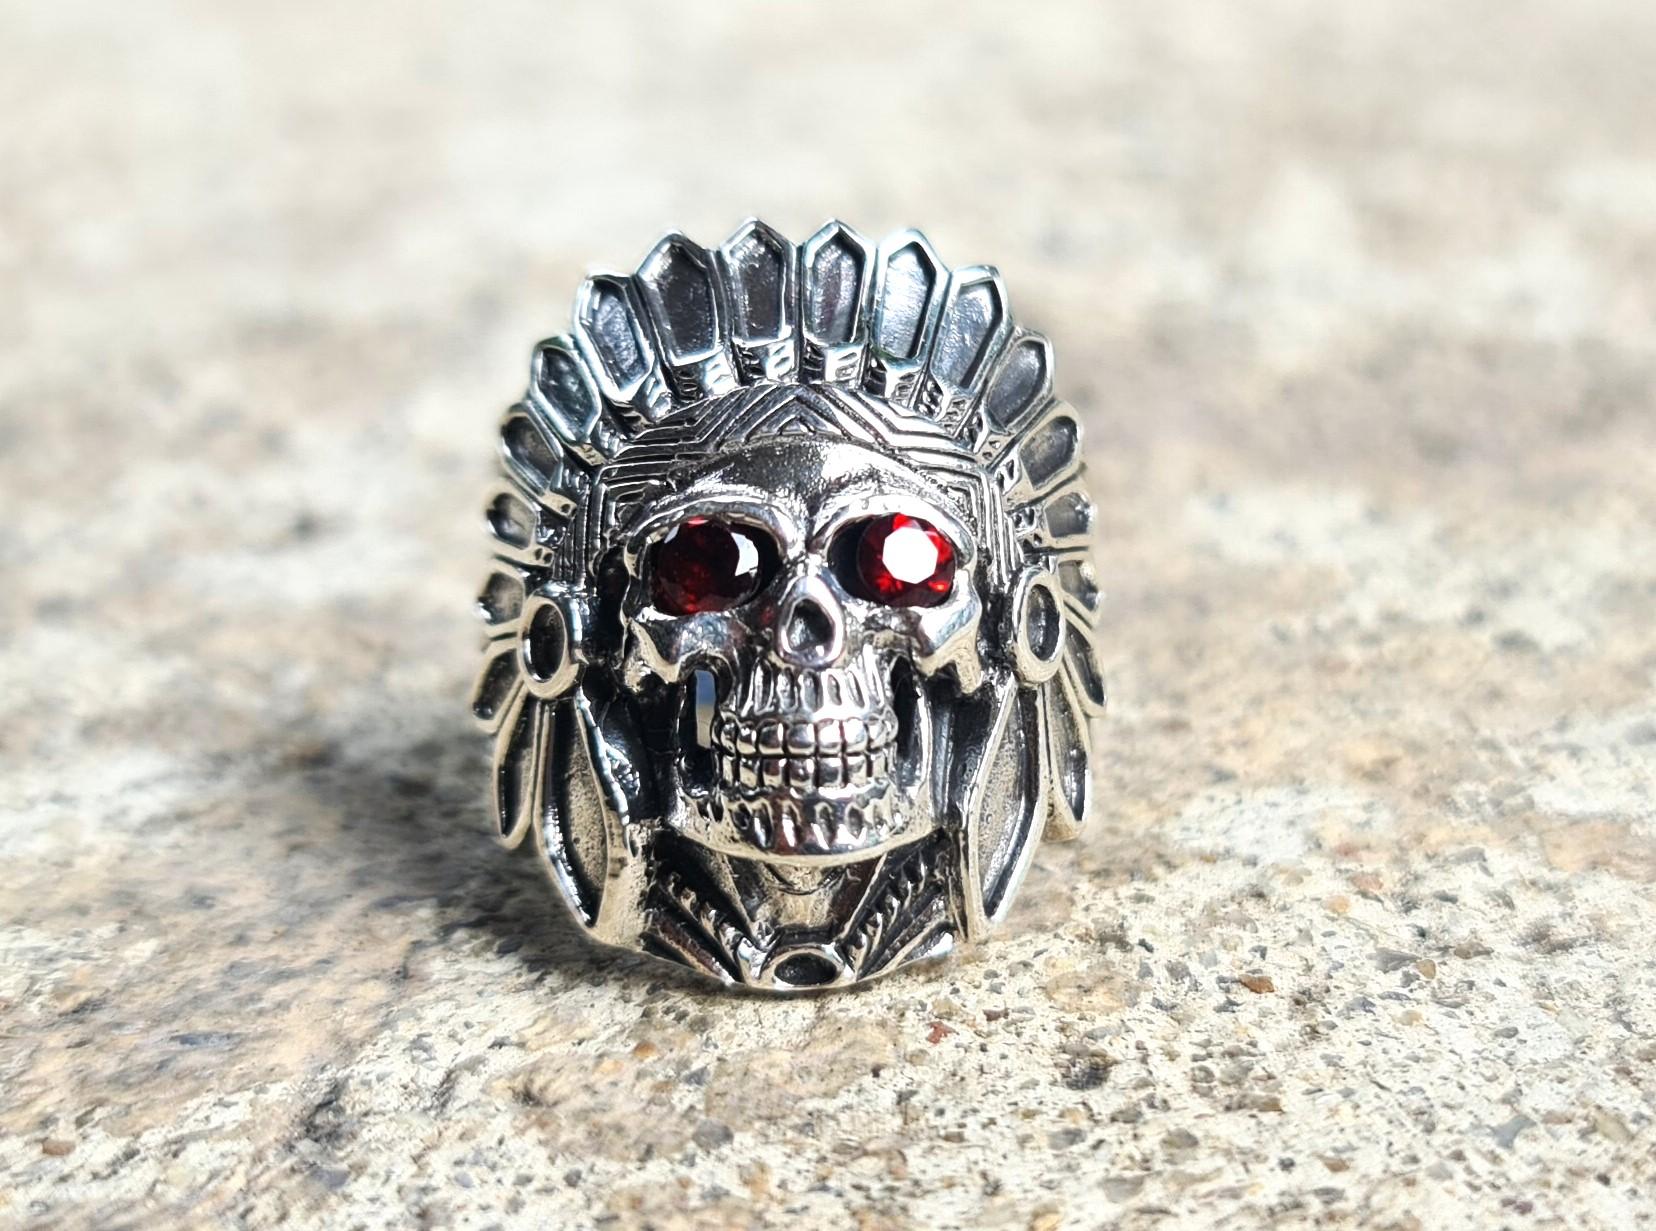 American Indian Tribal Chief Warrior Skull Ring with Natural Garnet

Solid 925 Sterling Silver Ring With Genuine Garnet

The weight of the ring is 16 grams

We can engrave any complexity. It can be any letter, sign, phrase, or logo.
10-20$ depending